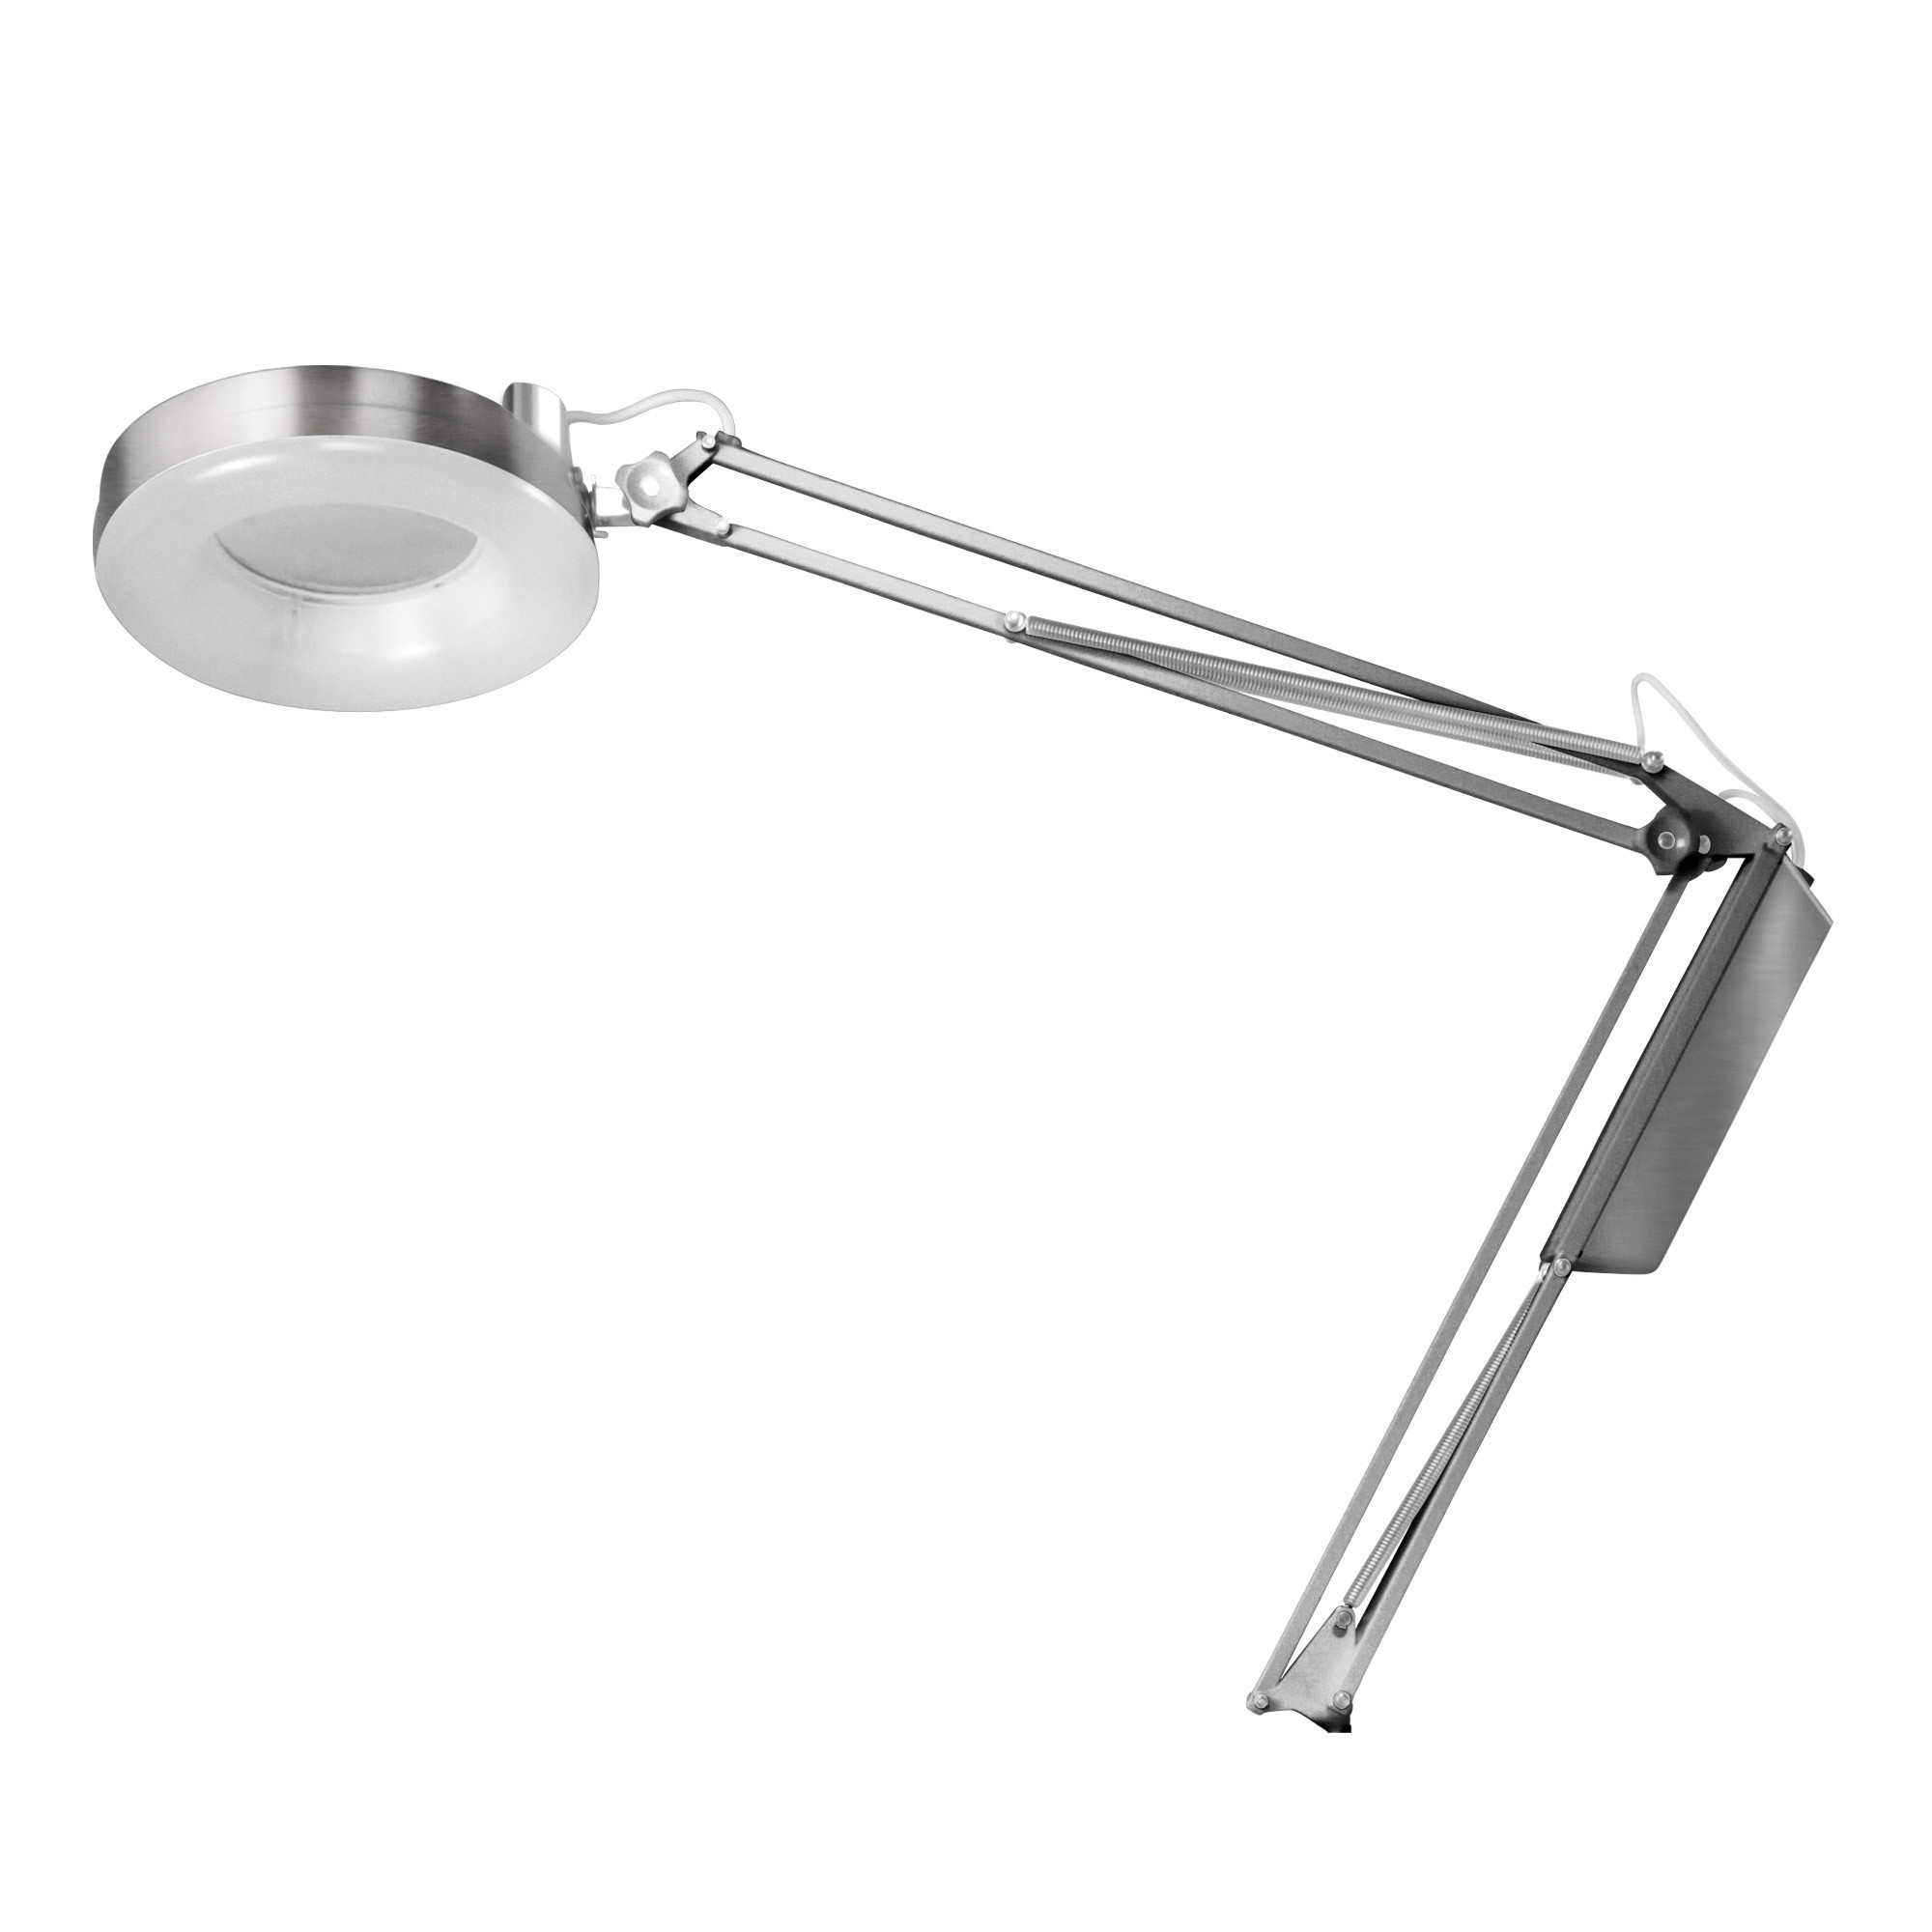 Afma lamp with neon light and chrome-plated 3-diopter magnifying glass